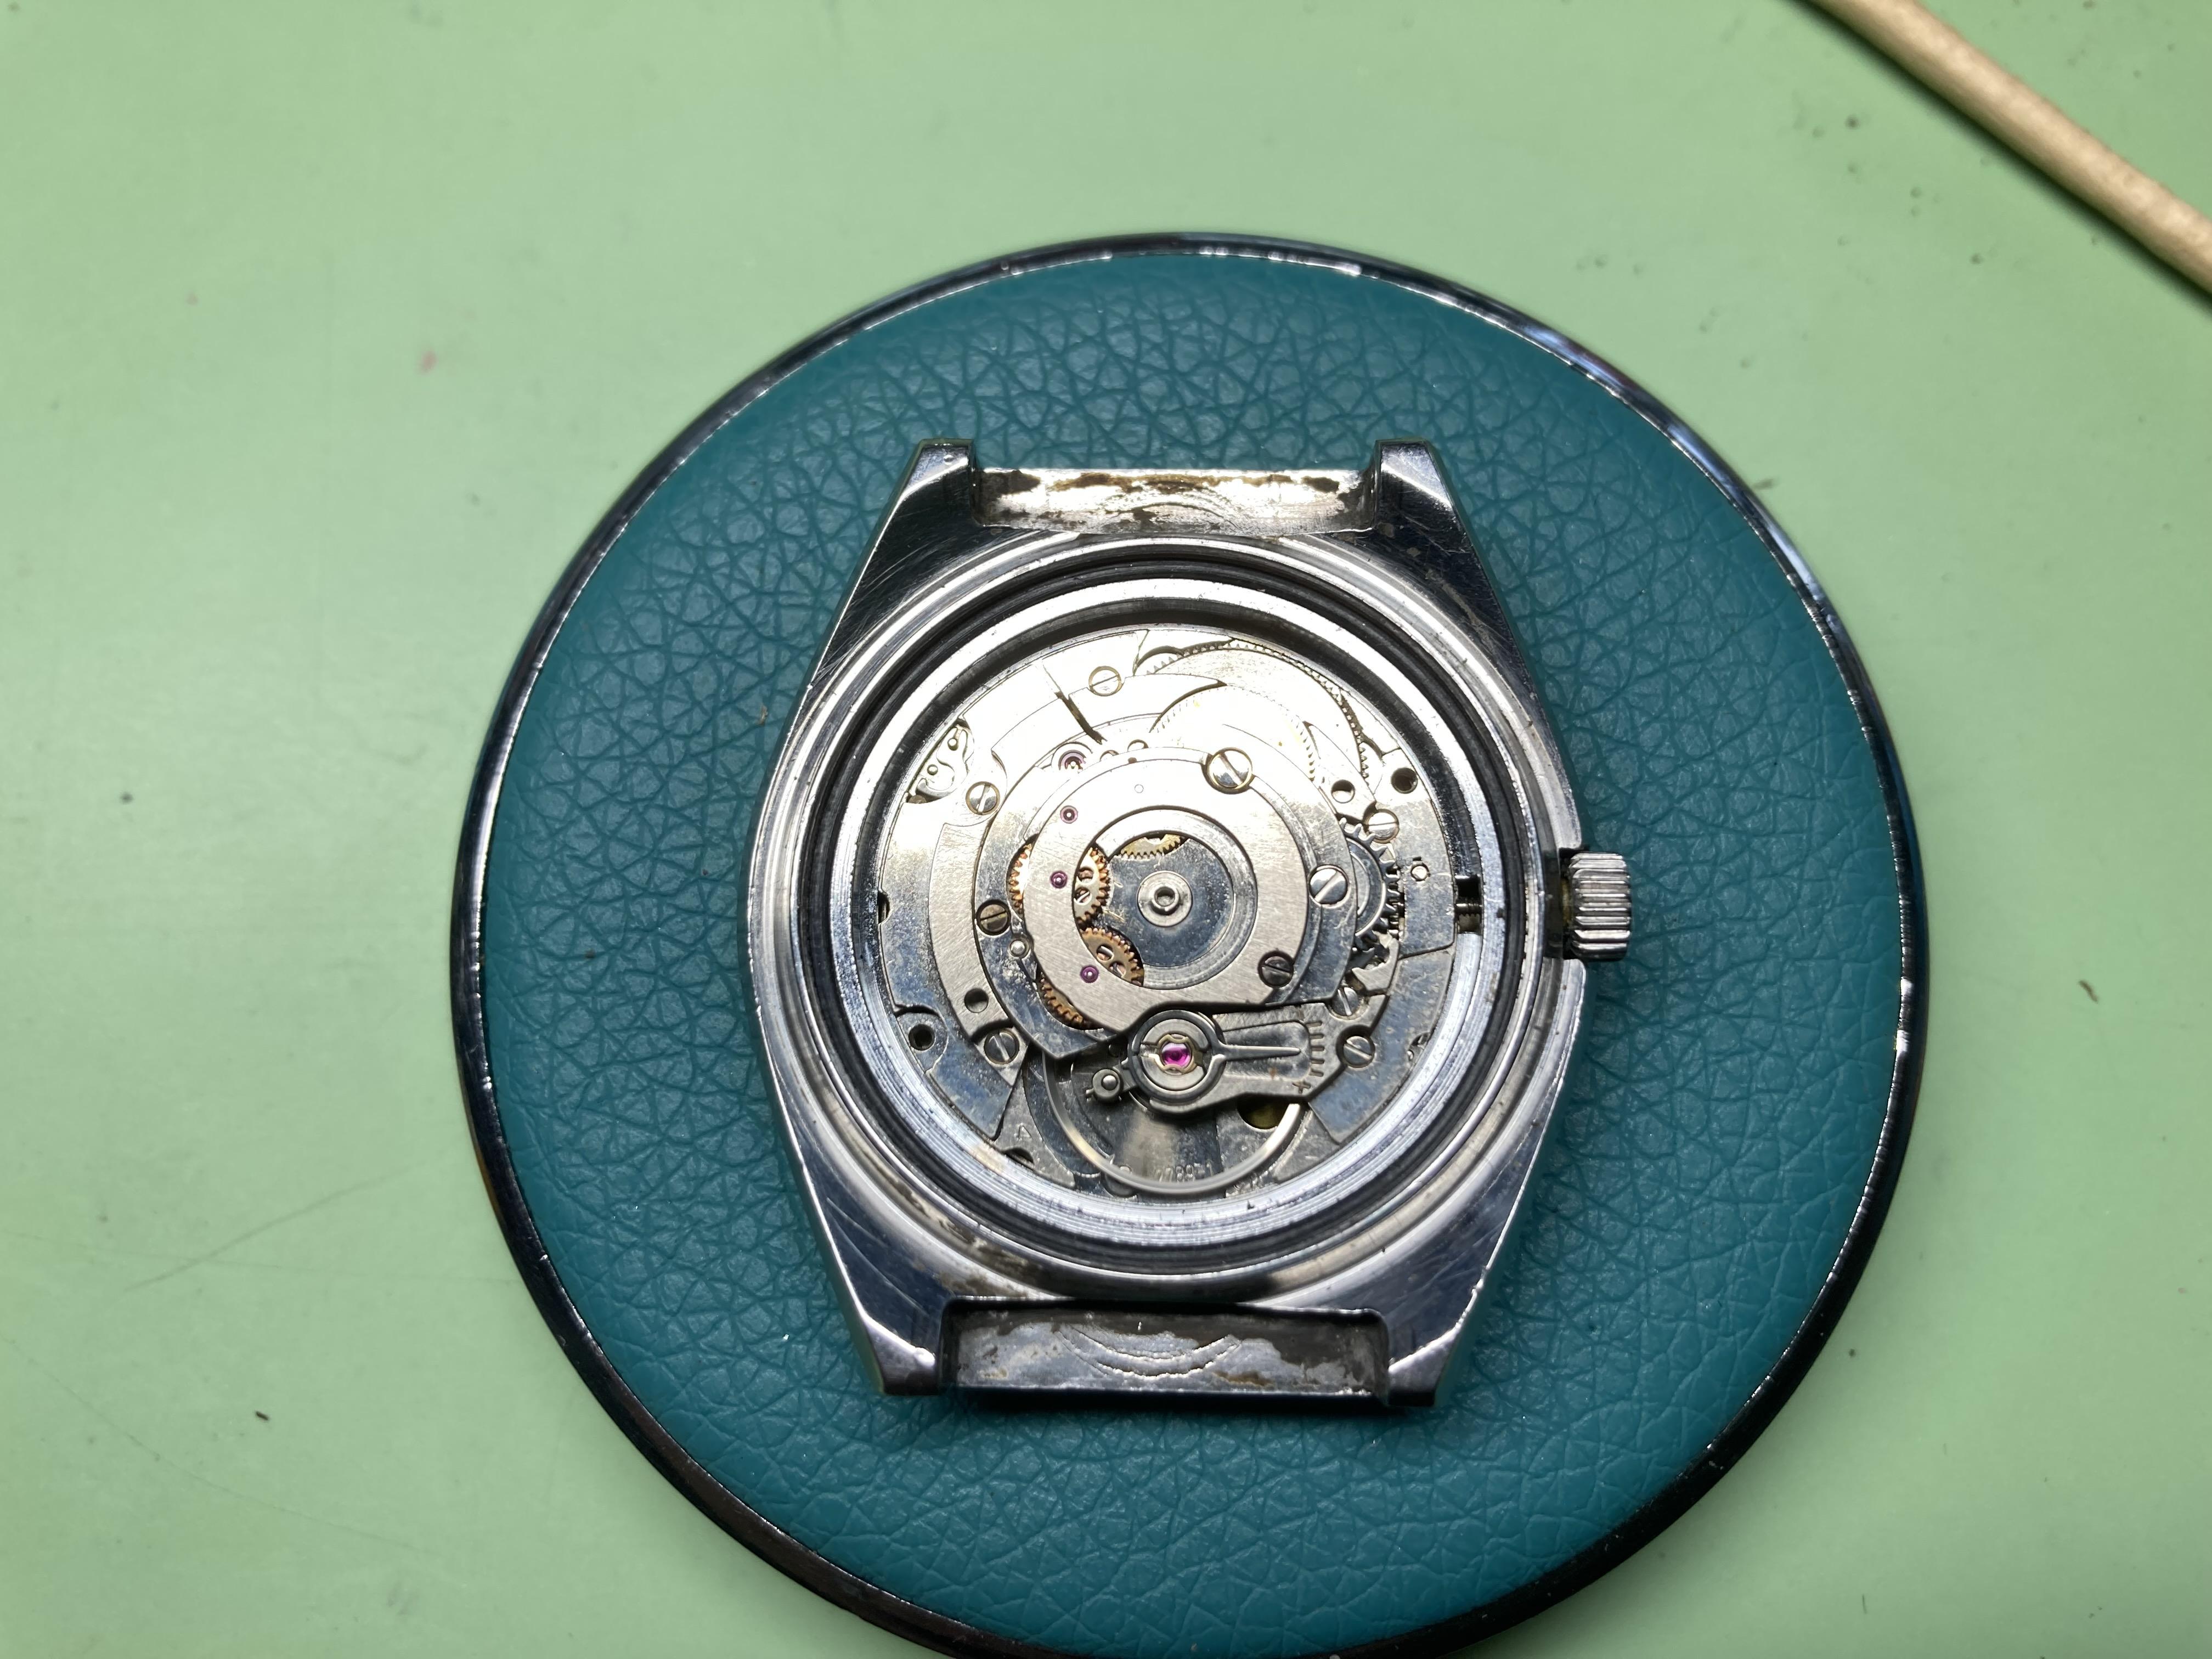 decasing a movement from a STB watch - Watch Repairs Help & Advice ...